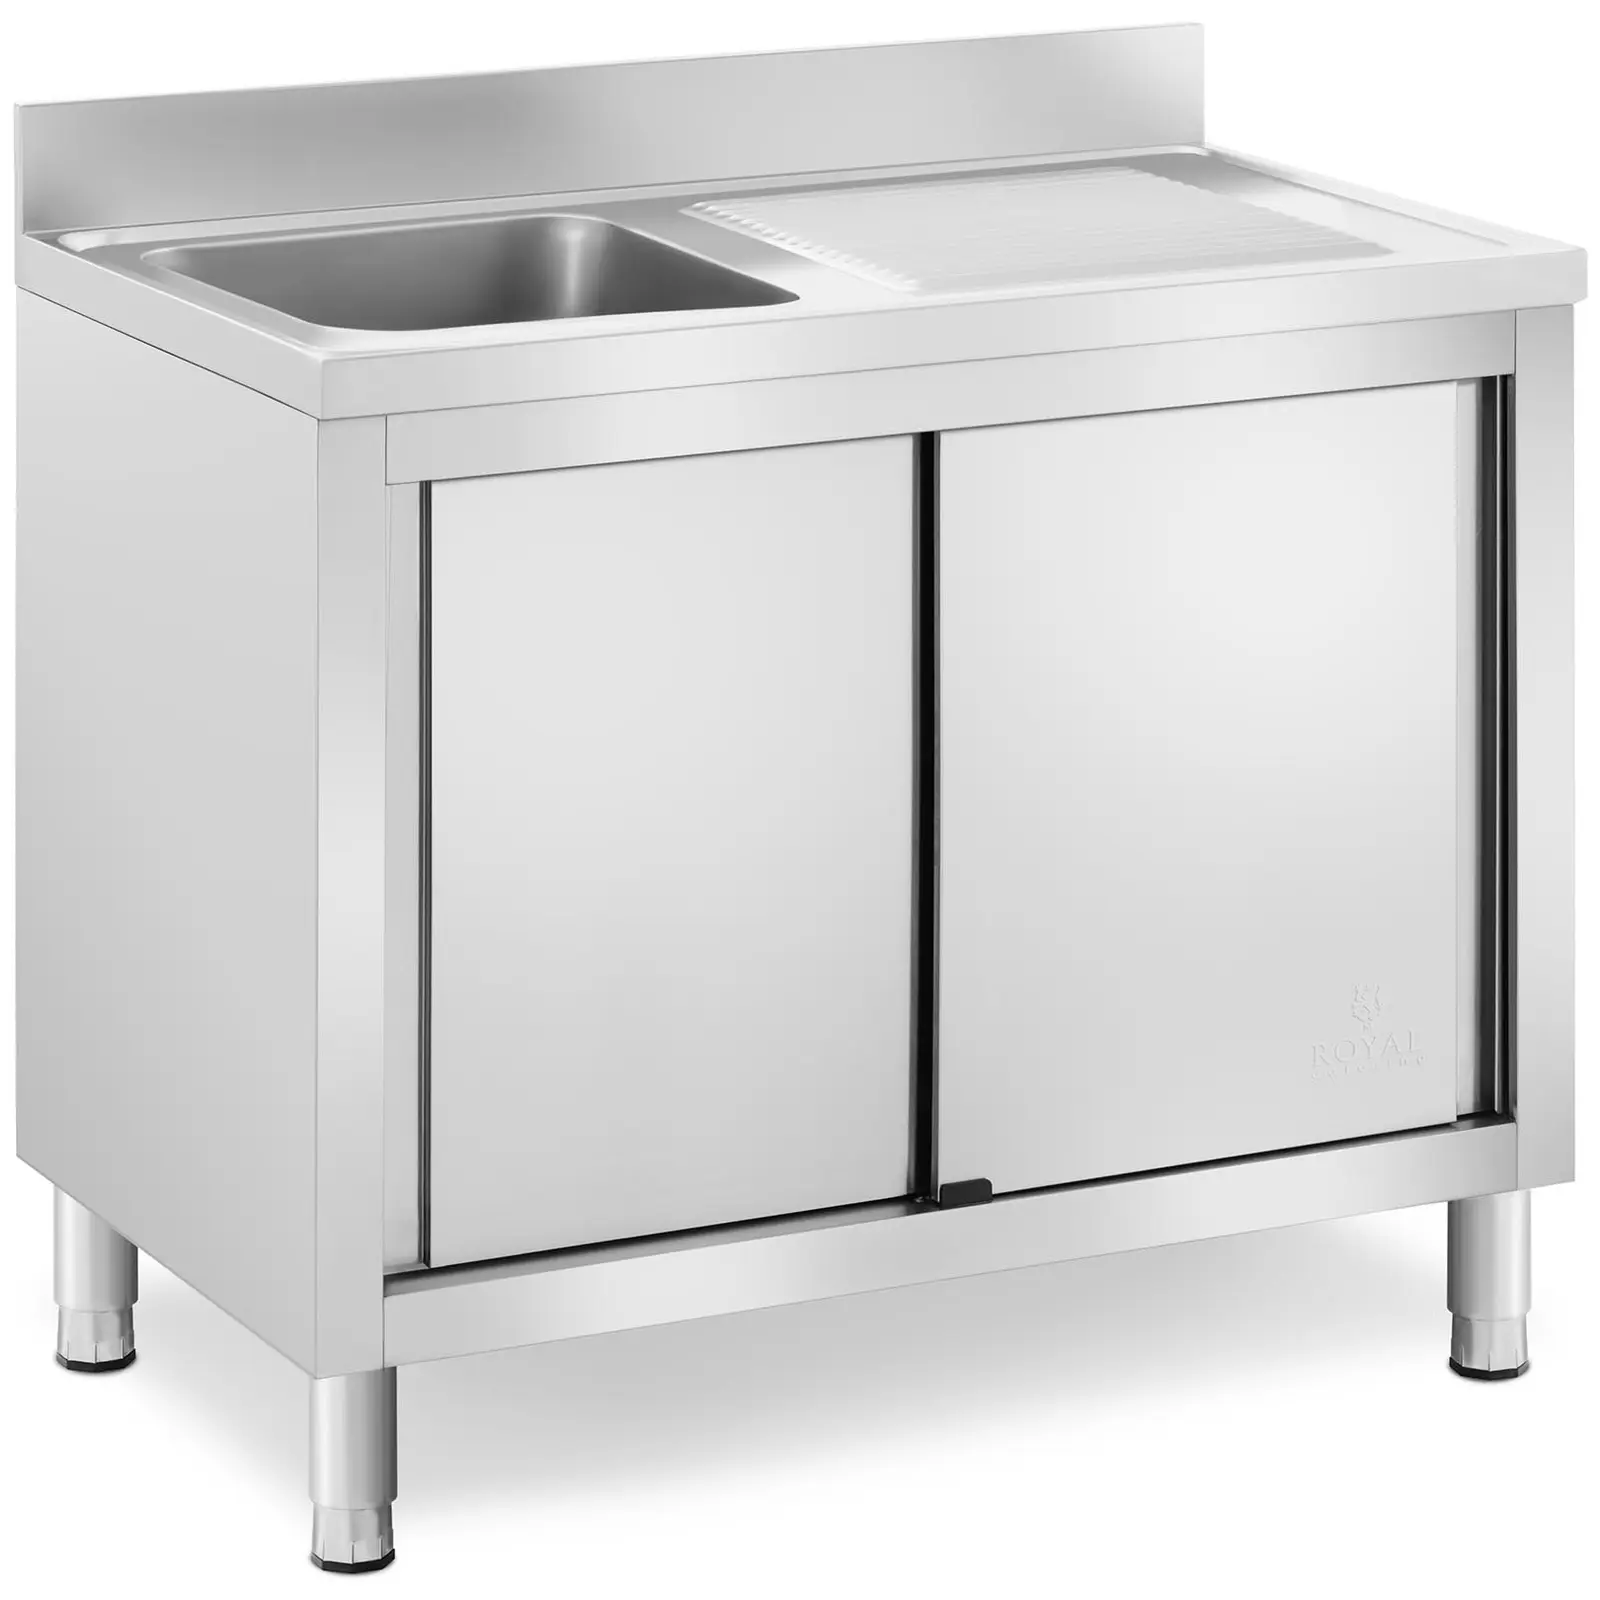 Wastafel kast - 1 Basin - Royal Catering - roestvrij staal - 400 x 400 x 240 mm